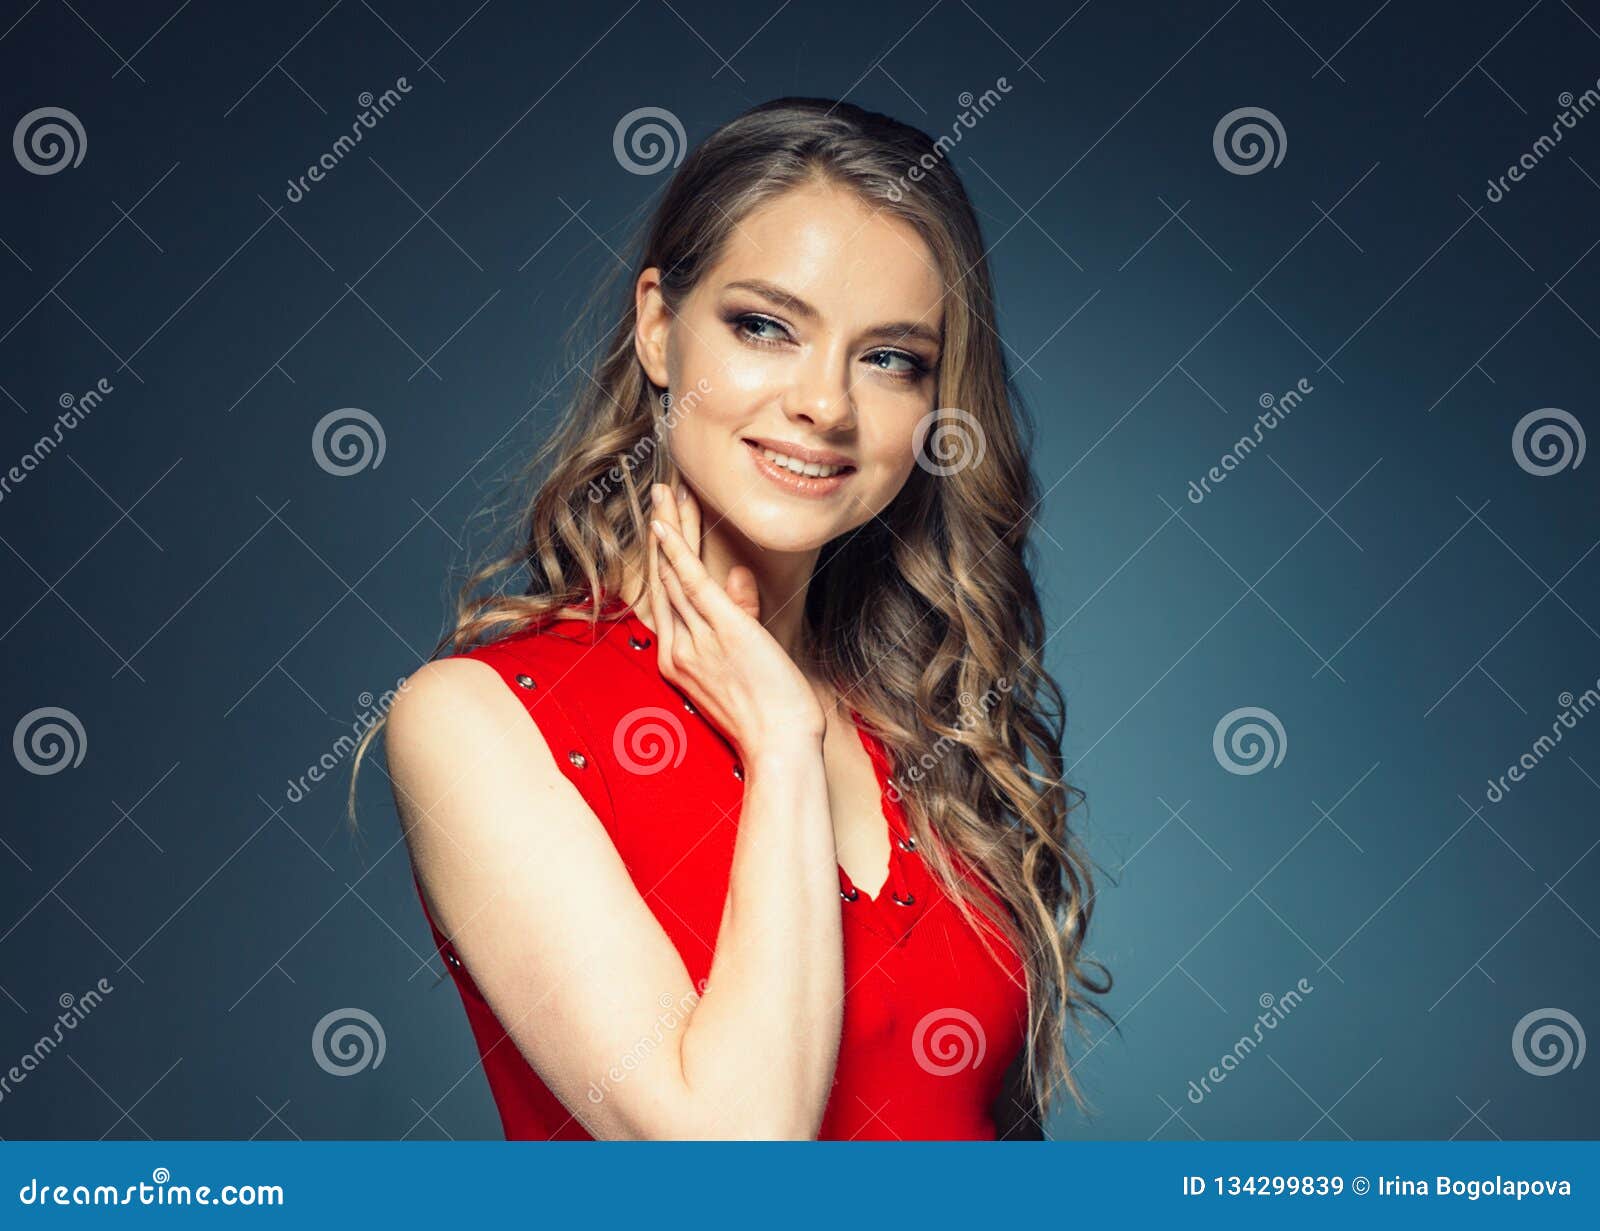 Woman in Red Dress with Long Blonde Hair Stock Image - Image of female ...